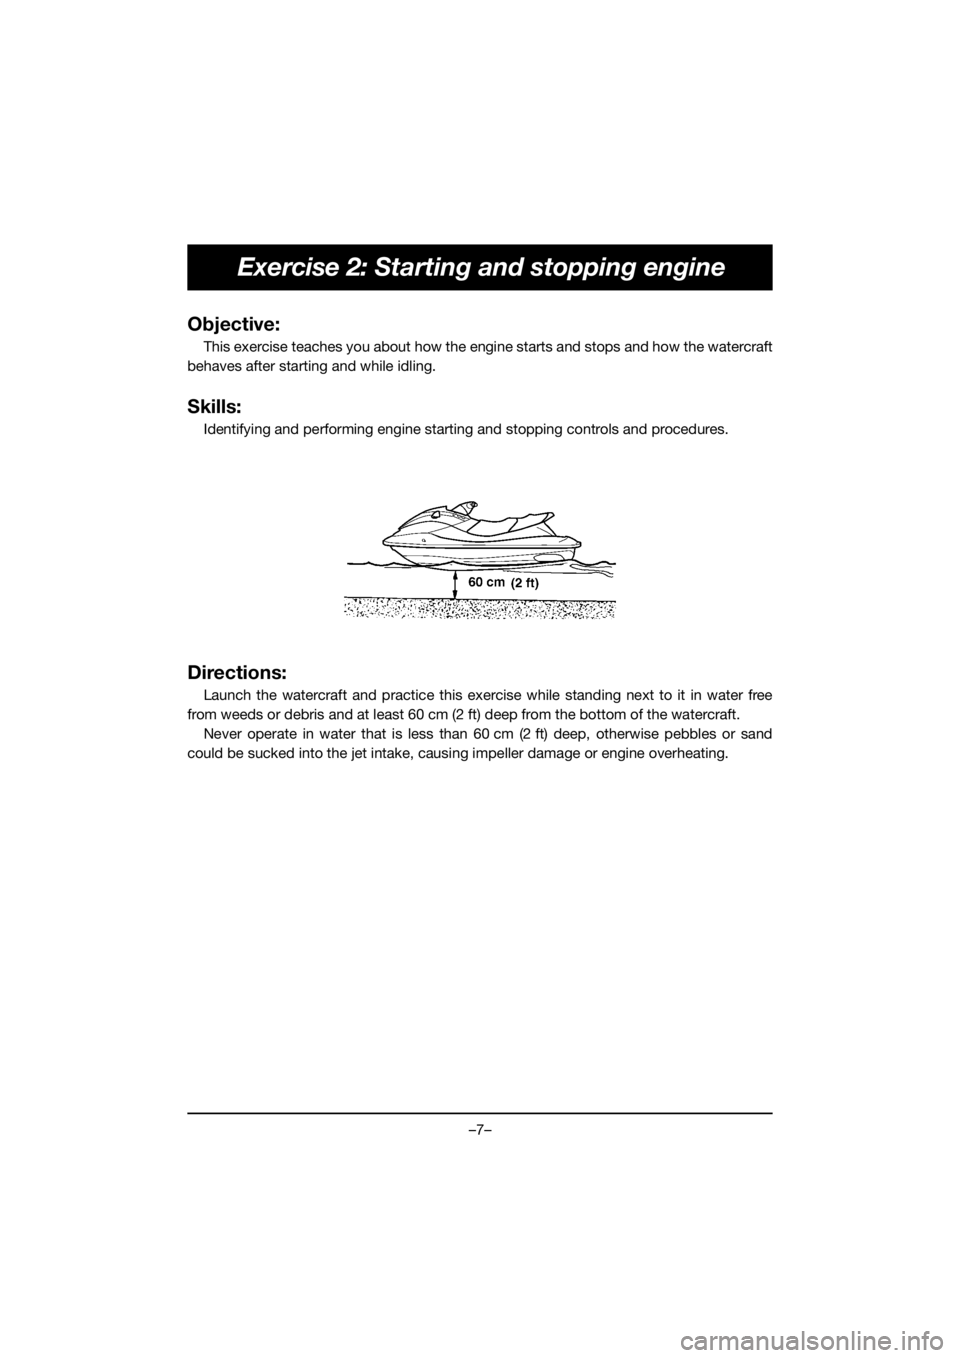 YAMAHA EX DELUXE 2020  Manuale de Empleo (in Spanish) –7–
Exercise 2: Starting and stopping engine
Objective:
This exercise teaches you about how the engine starts and stops and how the watercraft
behaves after starting and while idling.
Skills:
Iden